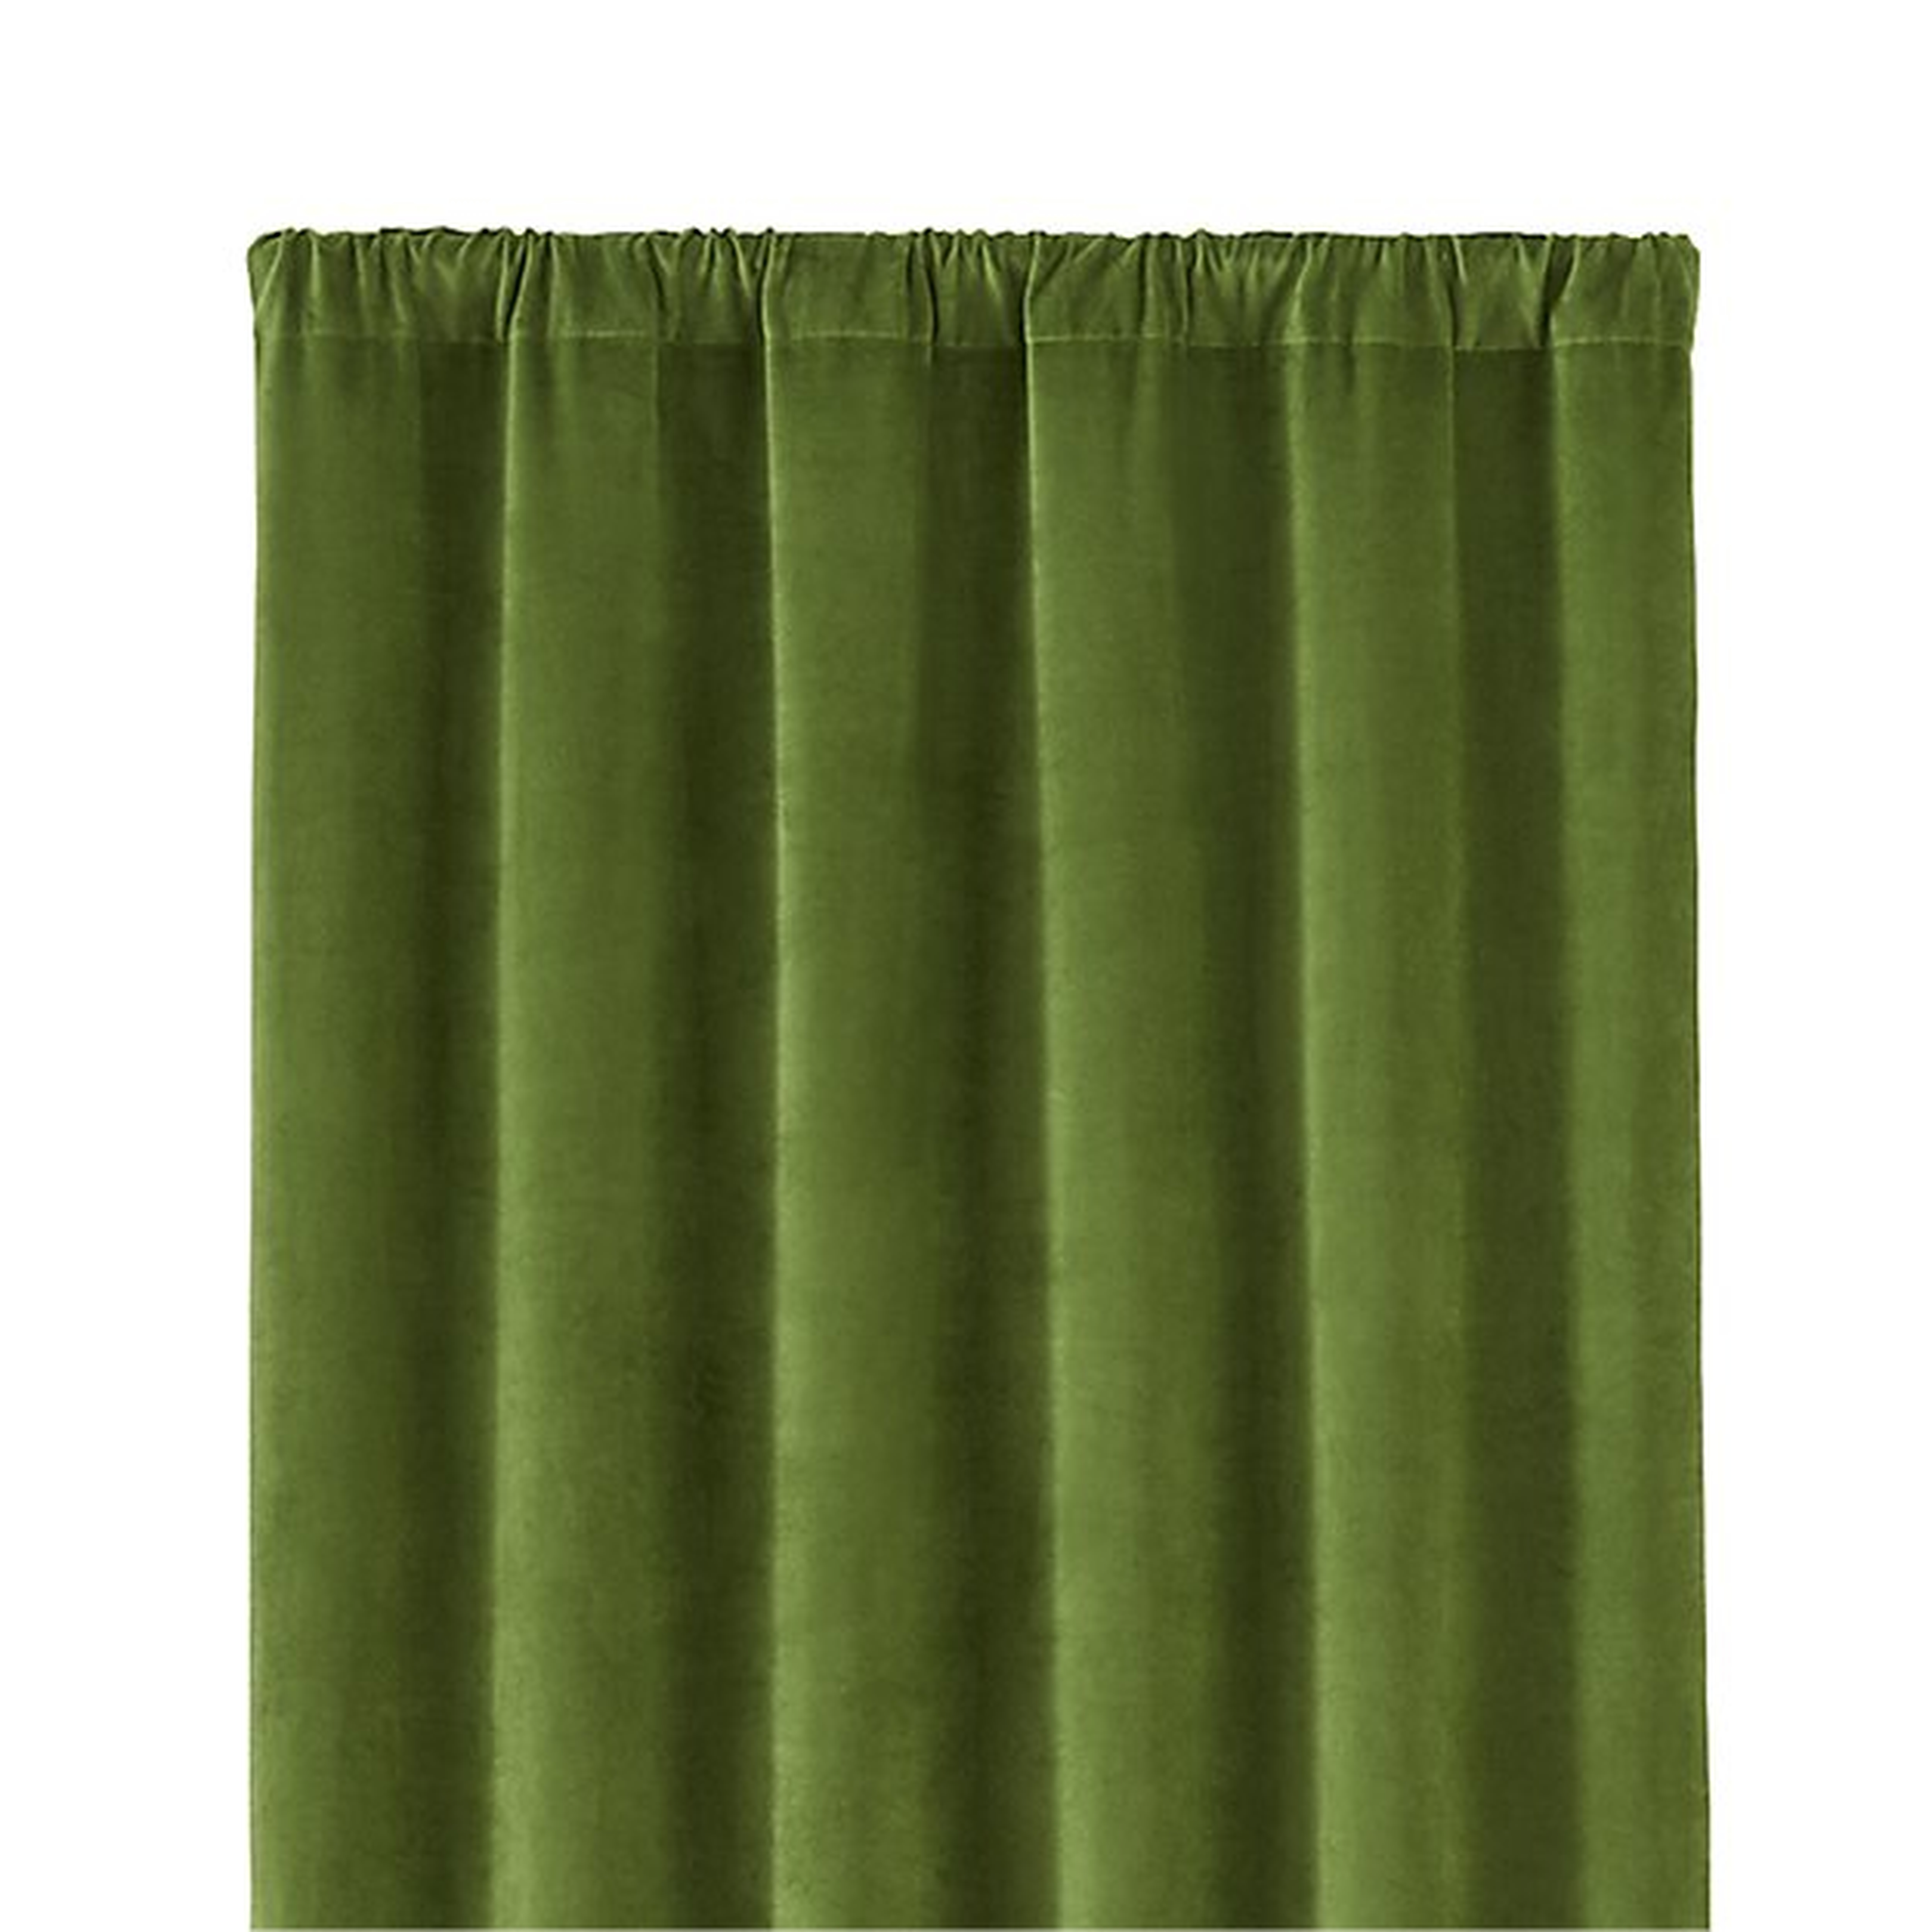 Windsor Green 48"x108" Curtain Panel - Crate and Barrel